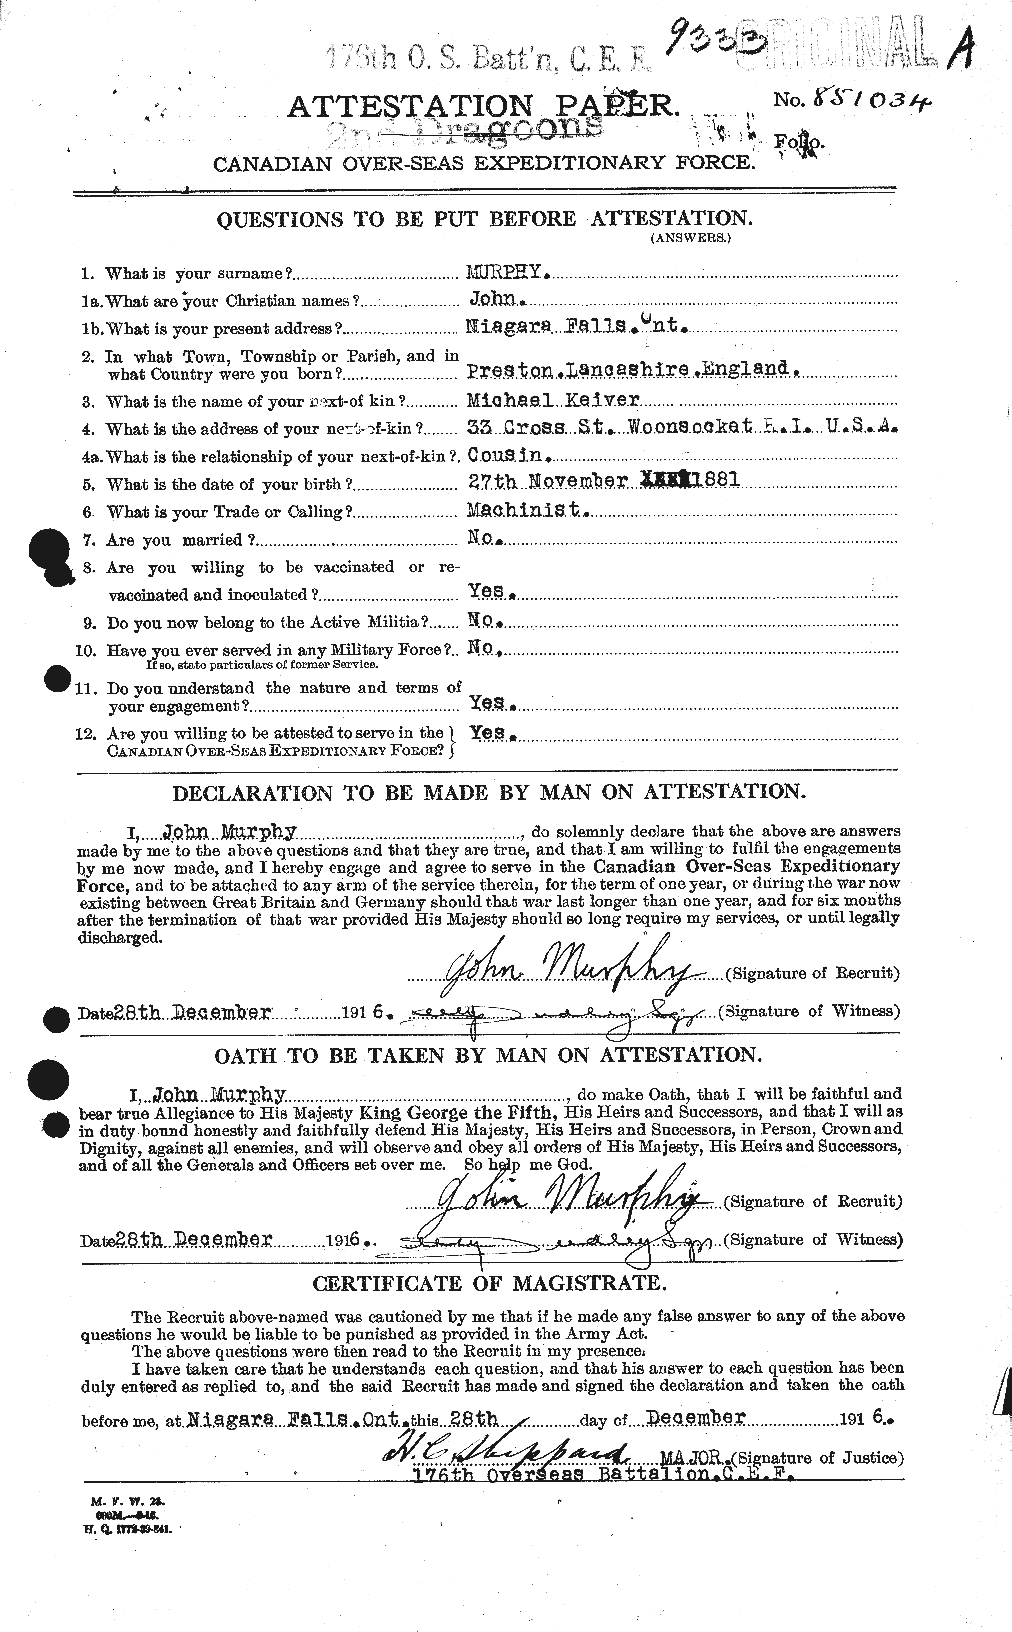 Personnel Records of the First World War - CEF 514730a